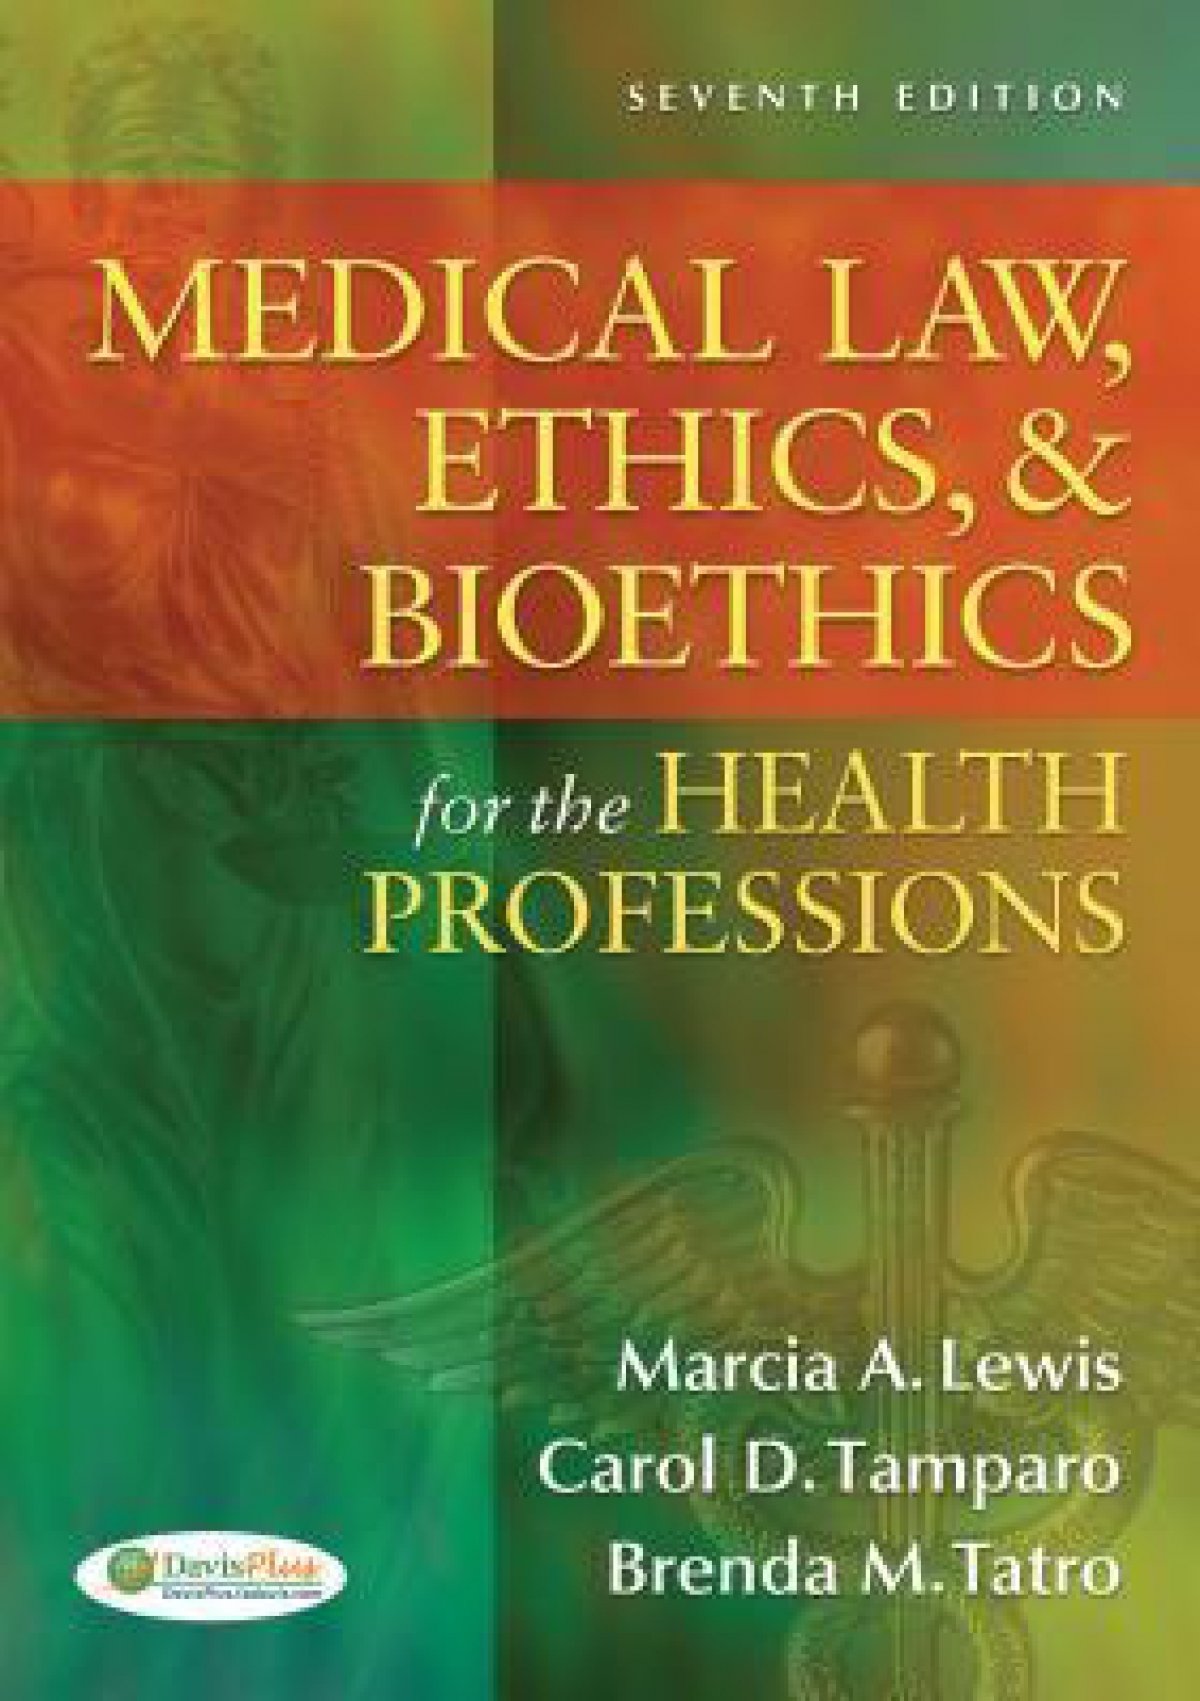 Pdf Medical Law Ethics Bioethics For The Health Professions By